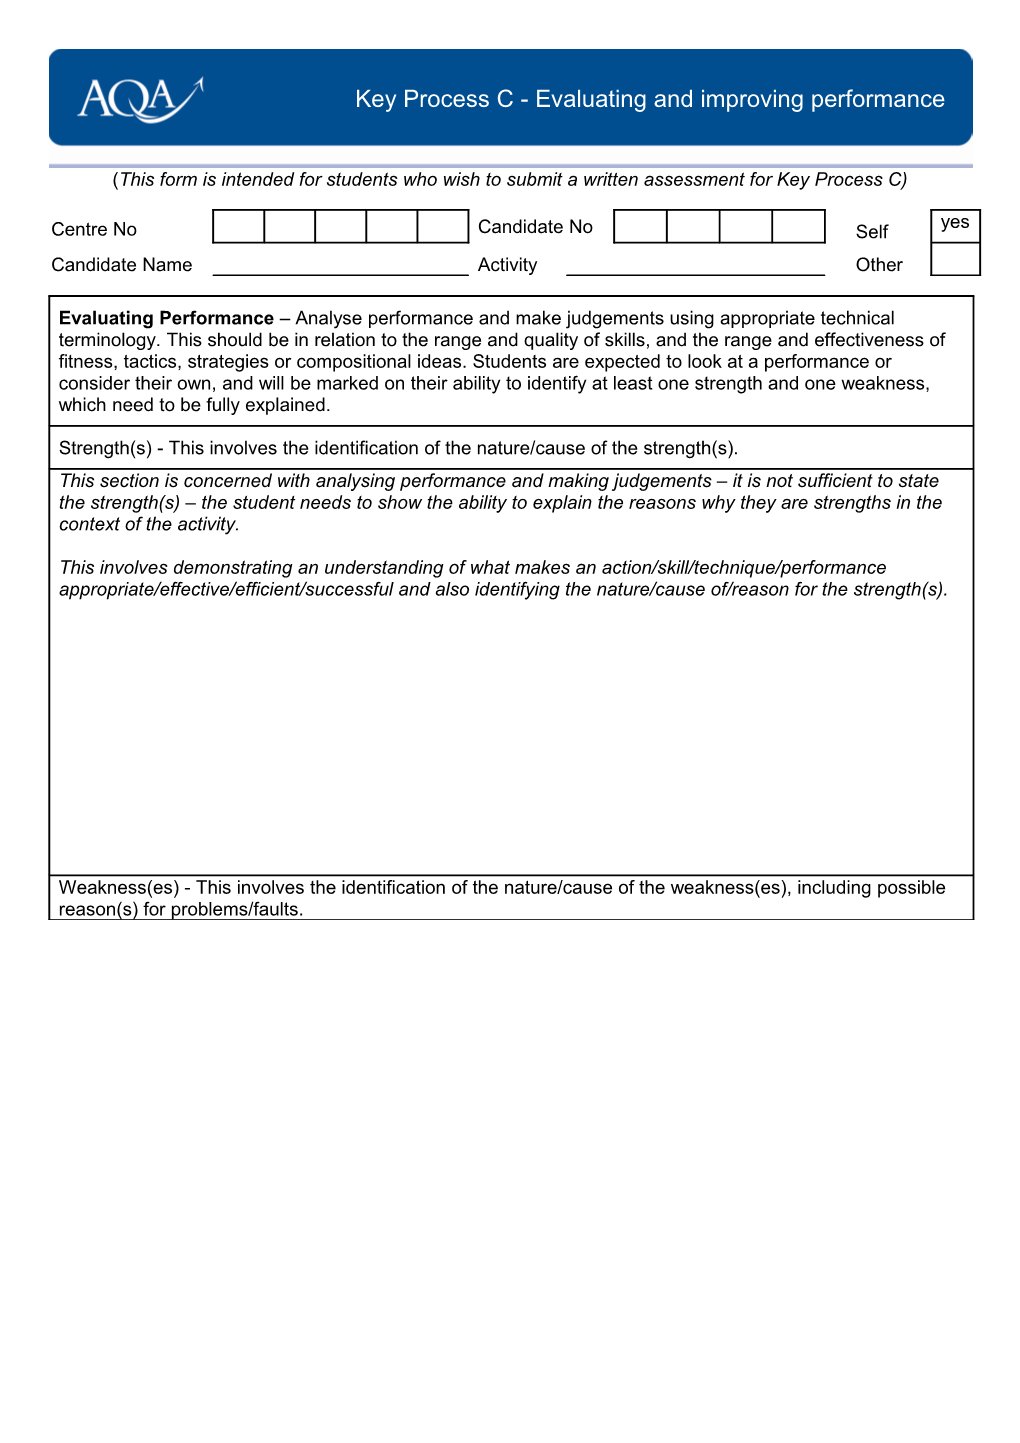 This Form Is Intended for Students Who Wish to Submit a Written Assessment for Key Process C